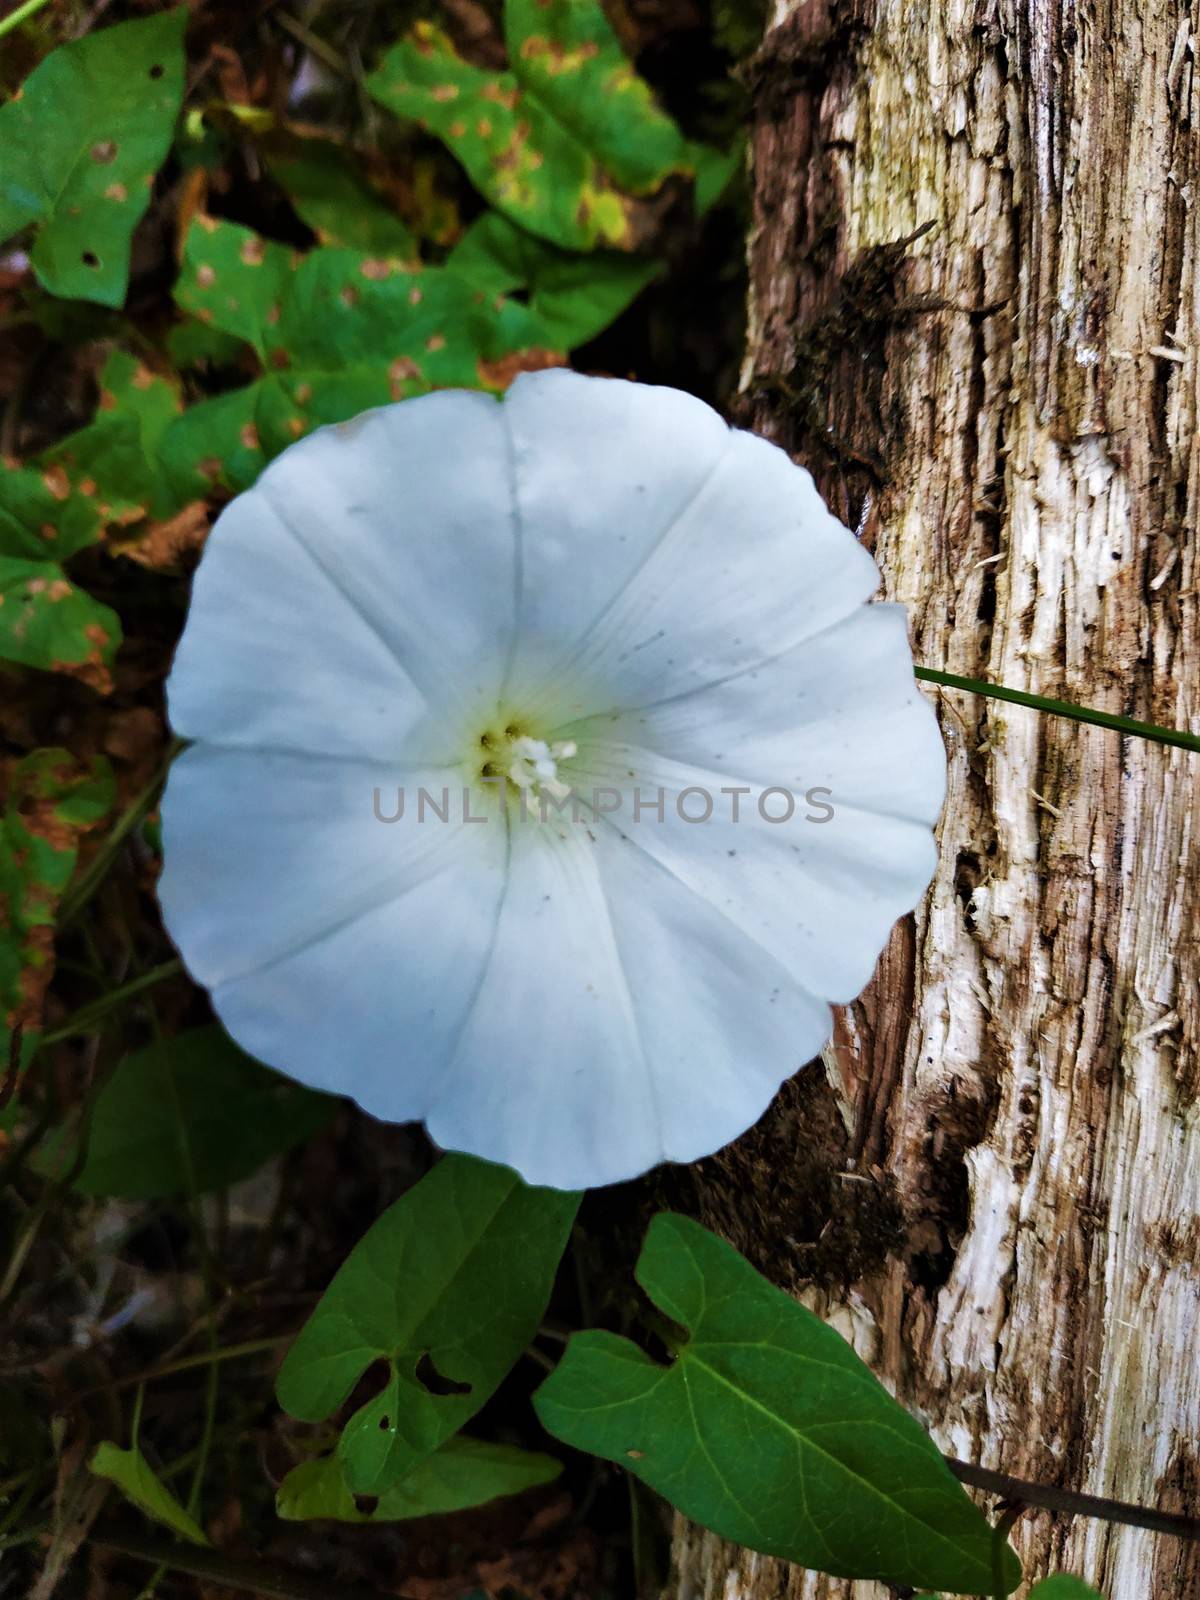 White blossom of unidentified species of moonflower or morning glory by pisces2386